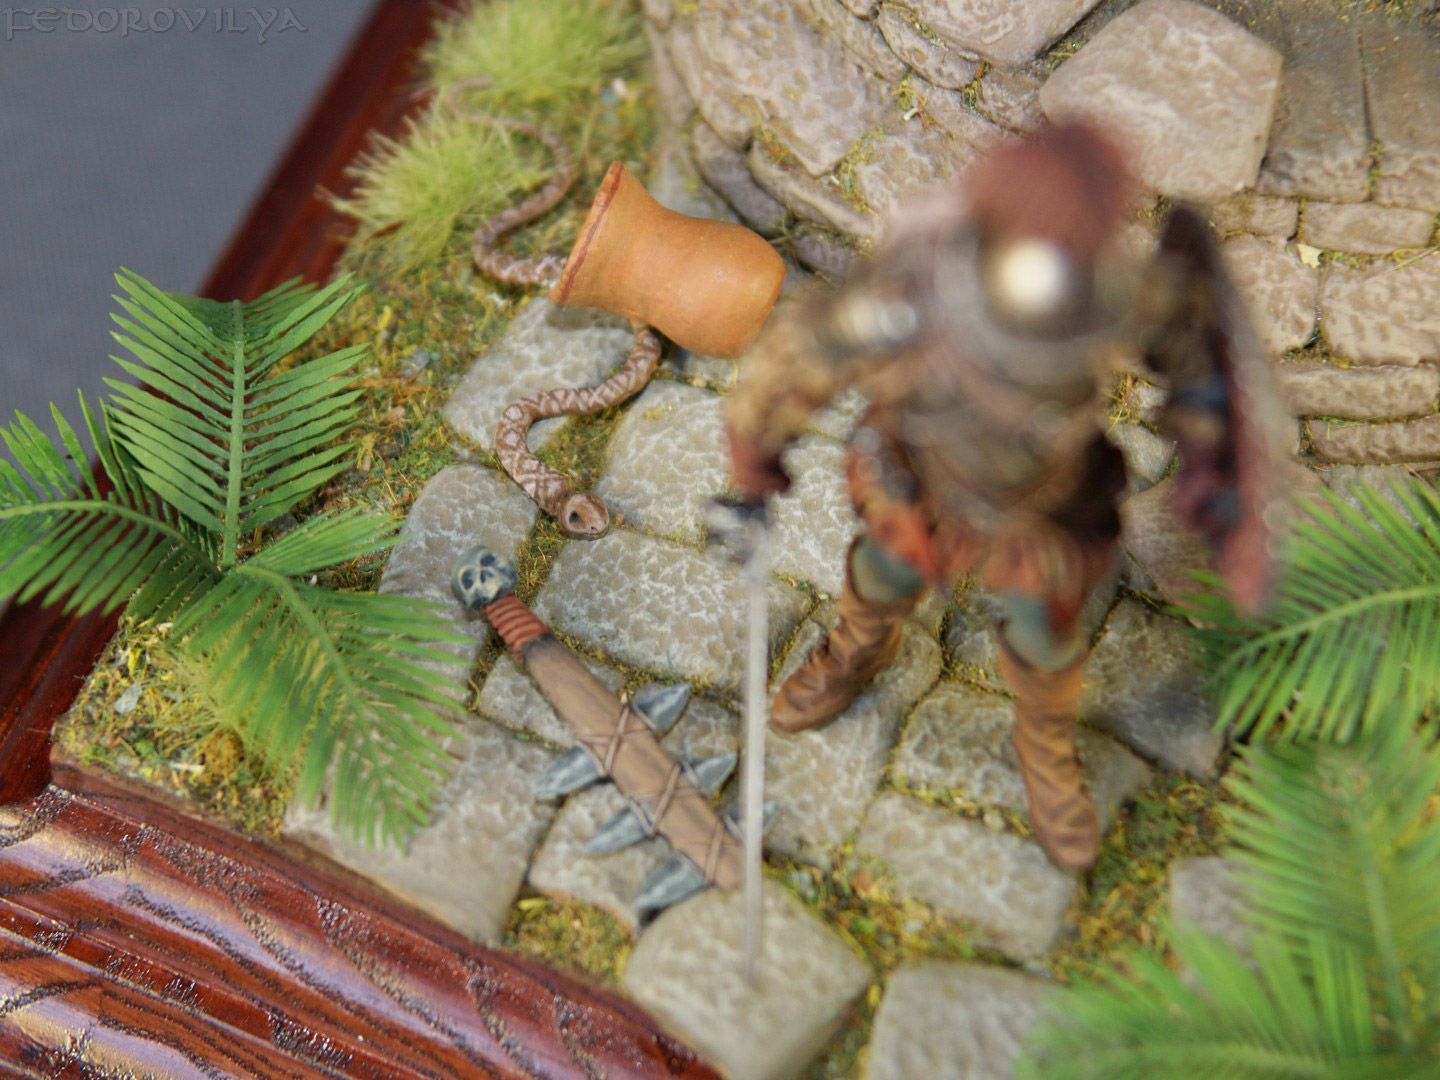 Dioramas and Vignettes: New World, photo #13